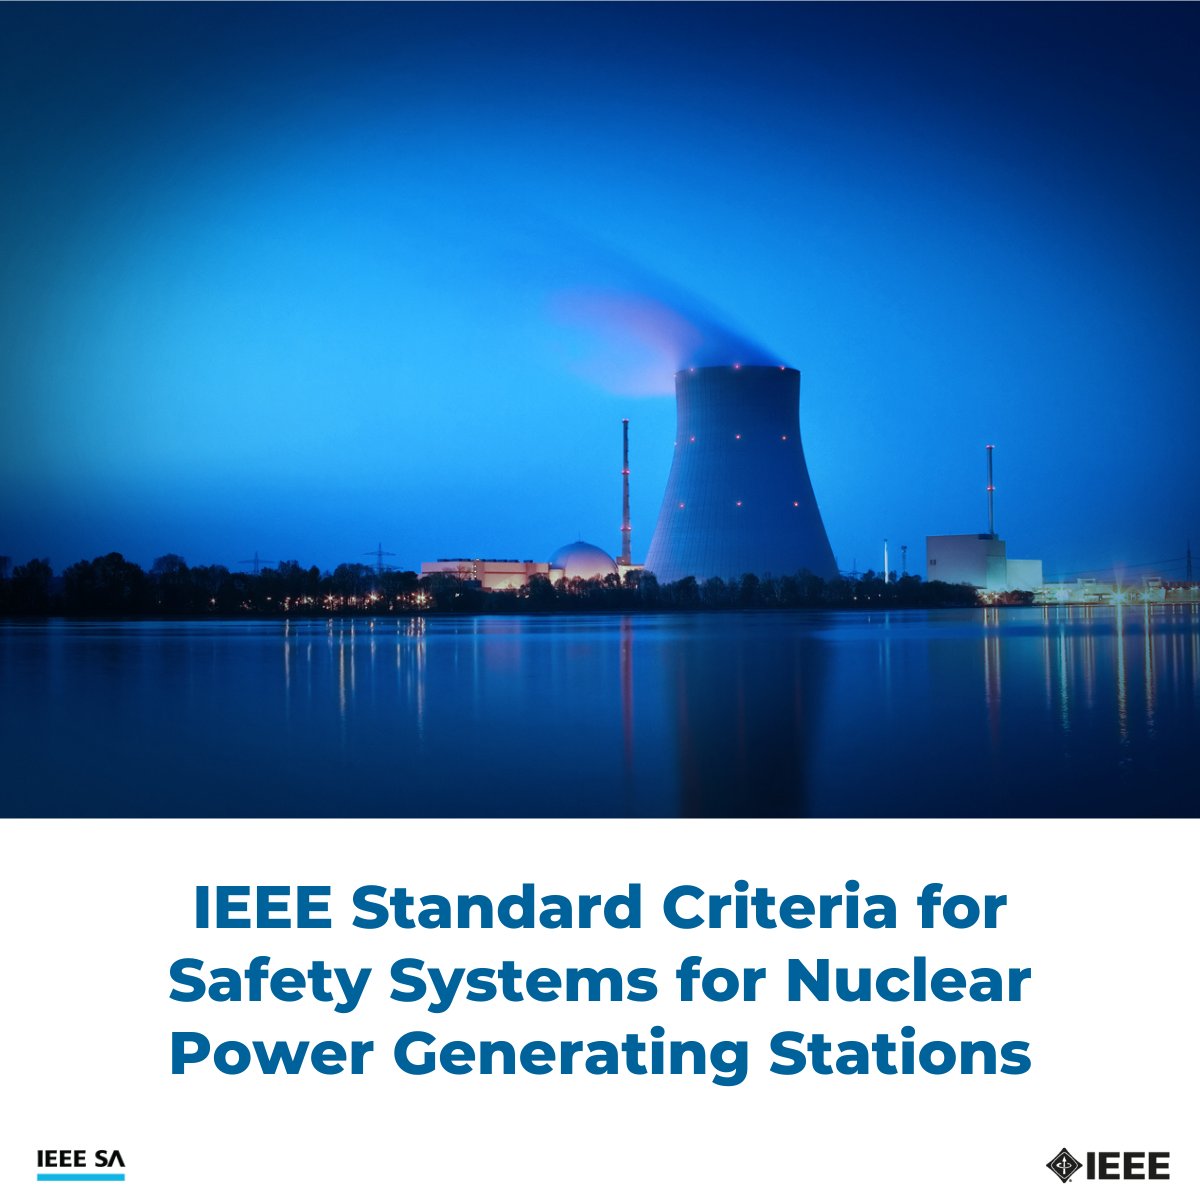 It's critical that safety be considered at every step of an electrical system, and that includes generation stations. That's why the Nuclear Power Engineering Committee developed this standard for nuclear power generation stations. ieeesa.io/3ytRtPD